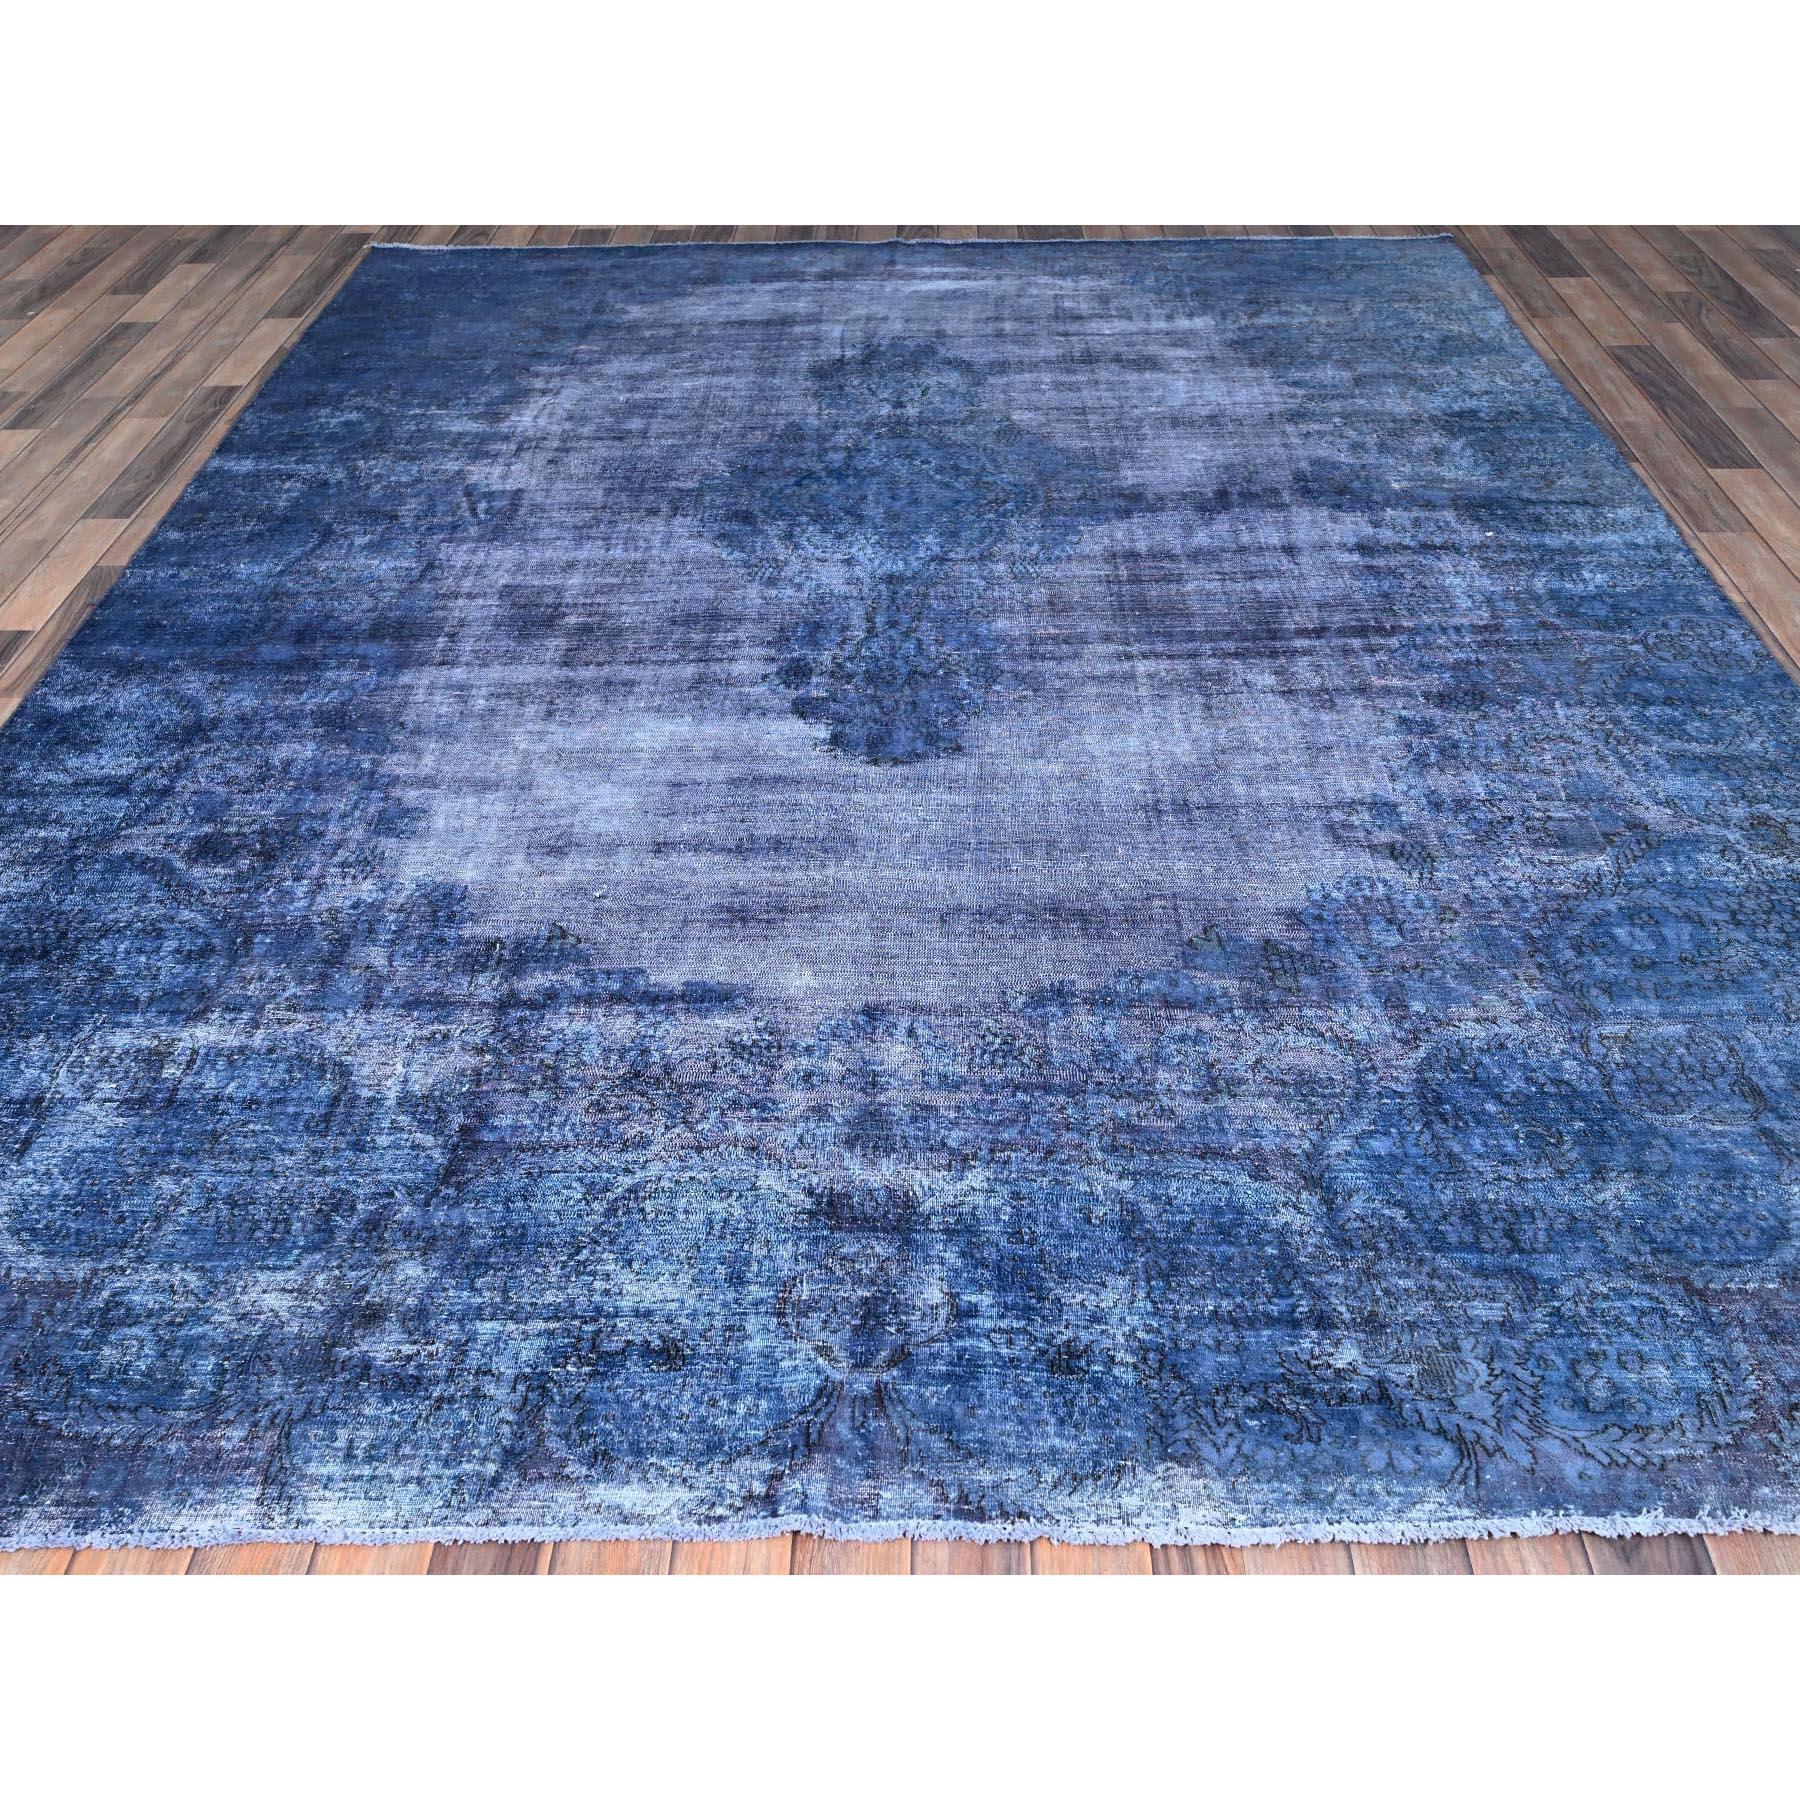 Medieval Blue Overdyed Vintage Persian Kerman Soft Wool Distressed Hand Knotted Clean Rug For Sale